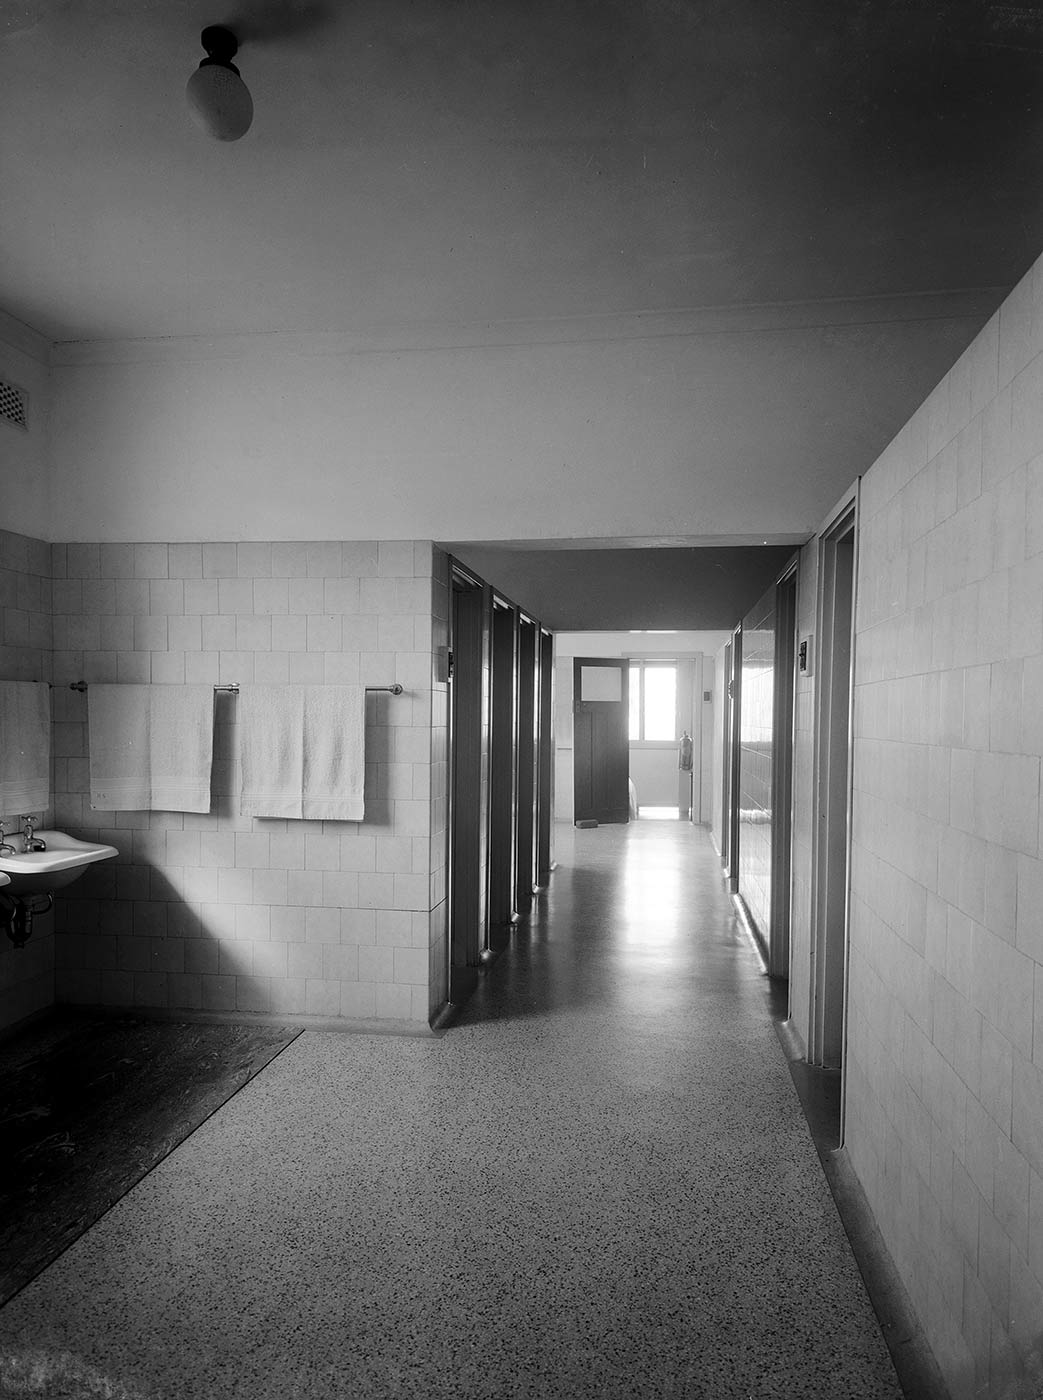 Image showing a long corridor, with a sink and towels on the left, several doorways in the centre and an open door at the far end. - click to view larger image